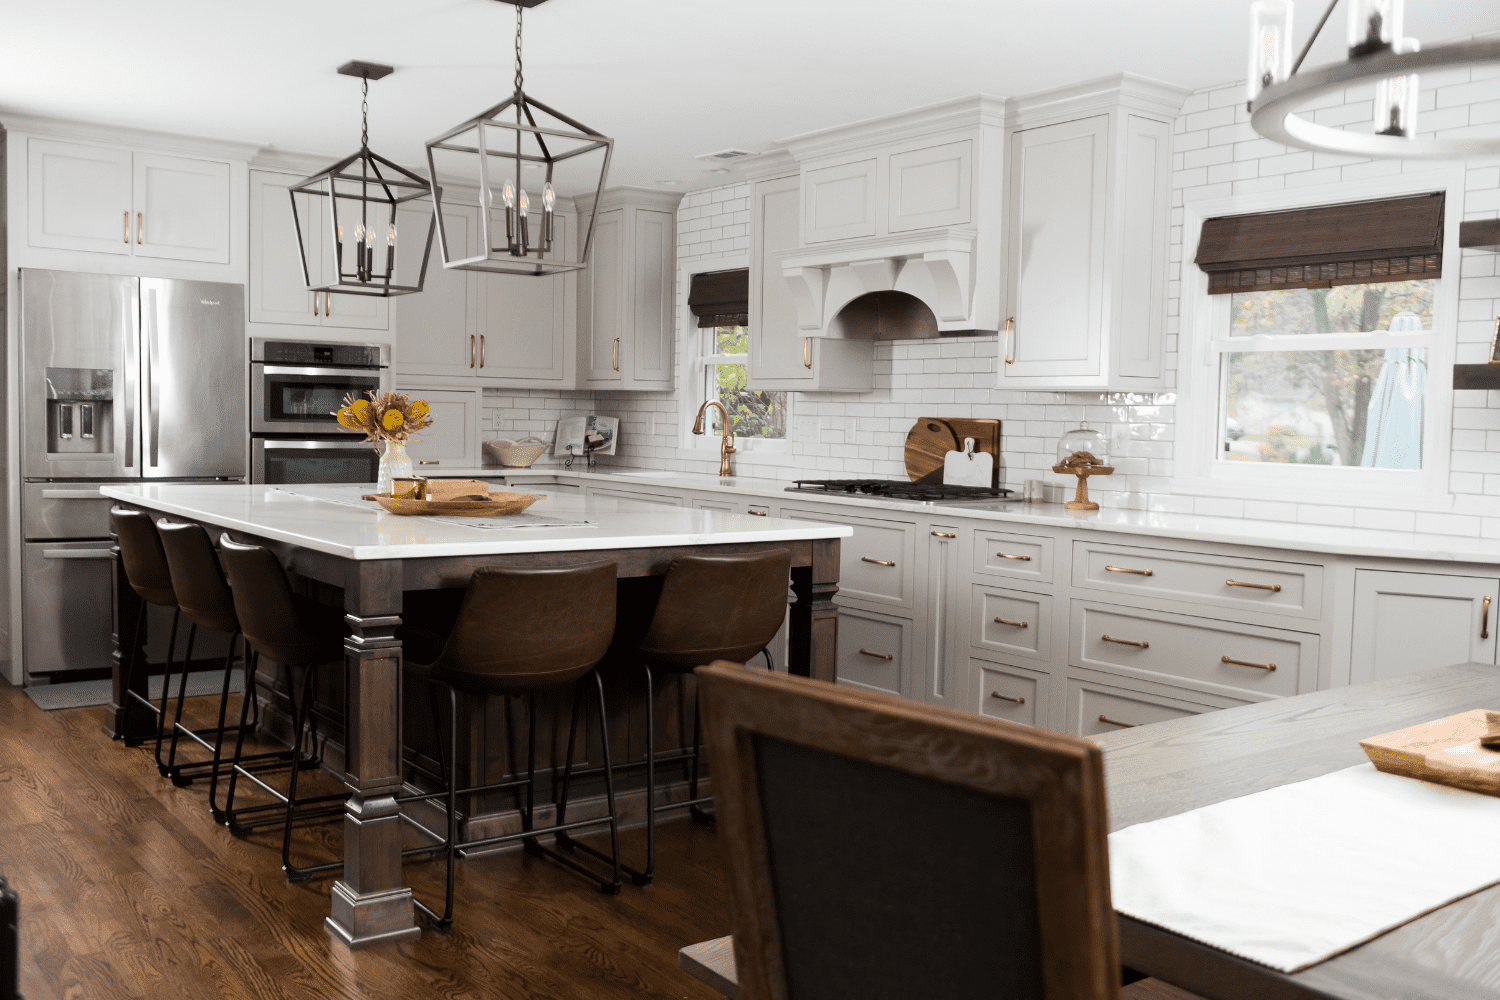 Nicholas Design Build | A kitchen with white cabinets and wood floors.